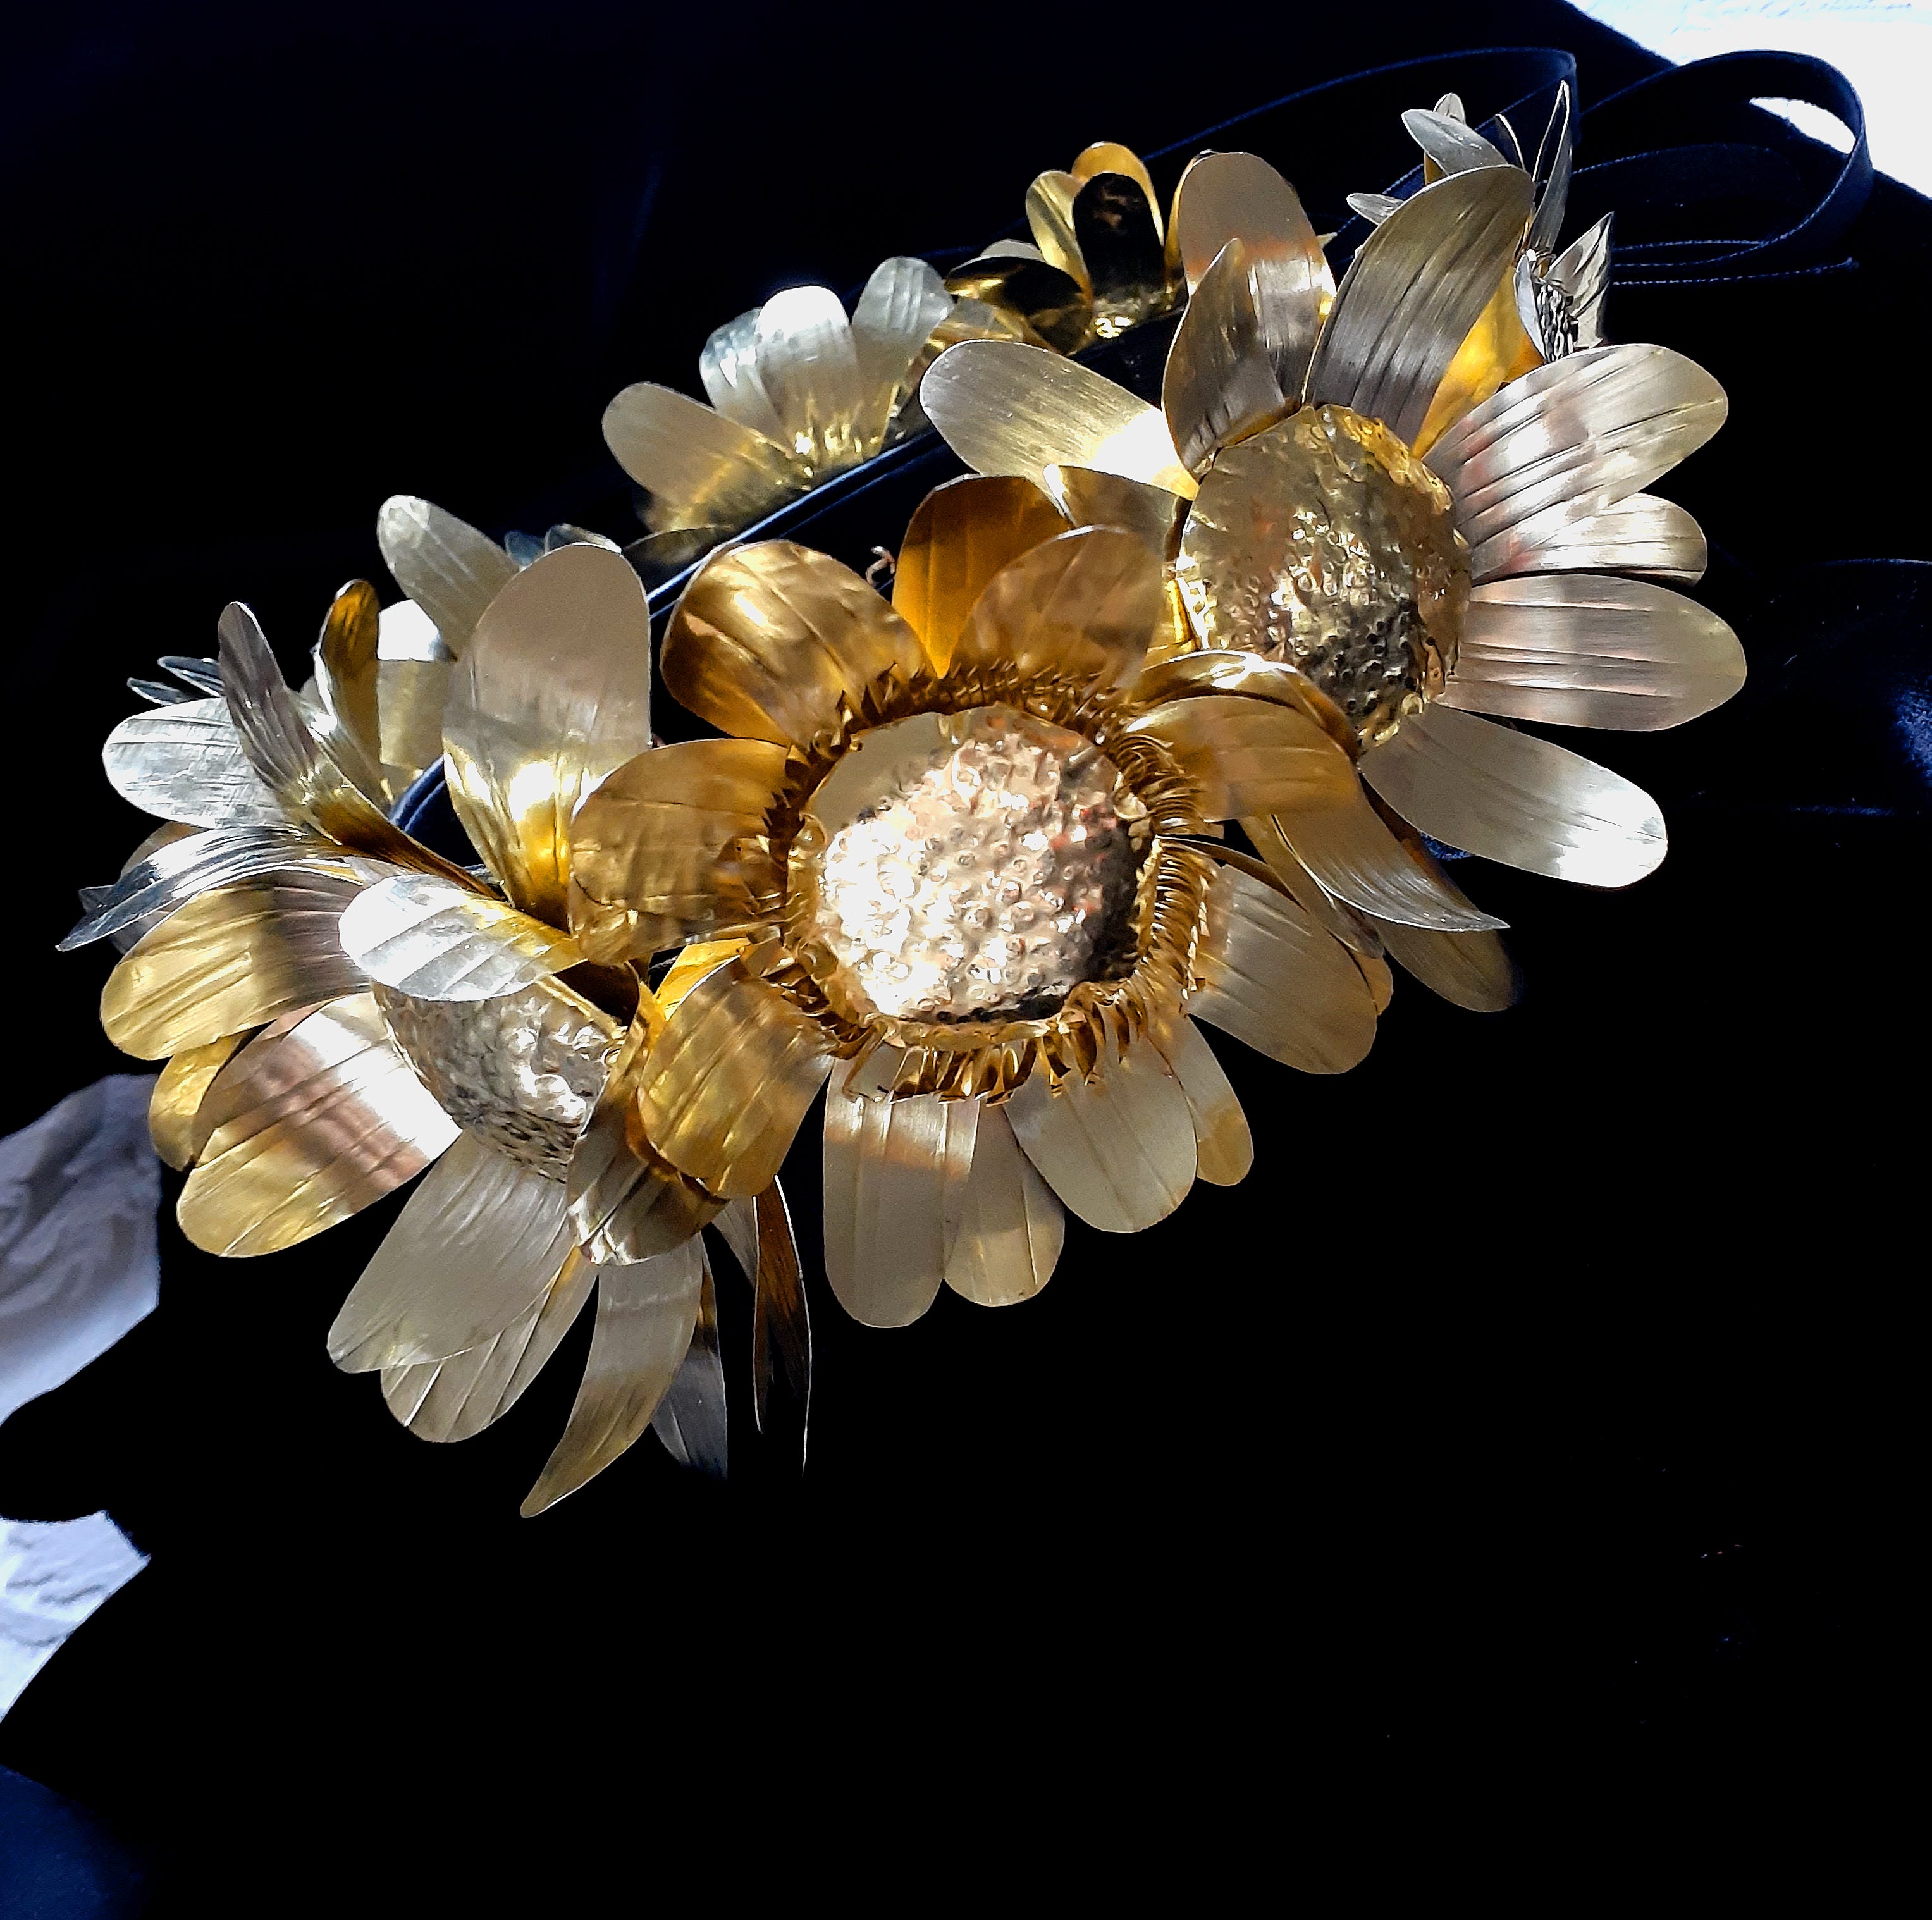 BRIDAL SUNFLOWER CROWN - INSPIRED BY TRADITIONAL UKRAINIAN WEDDING